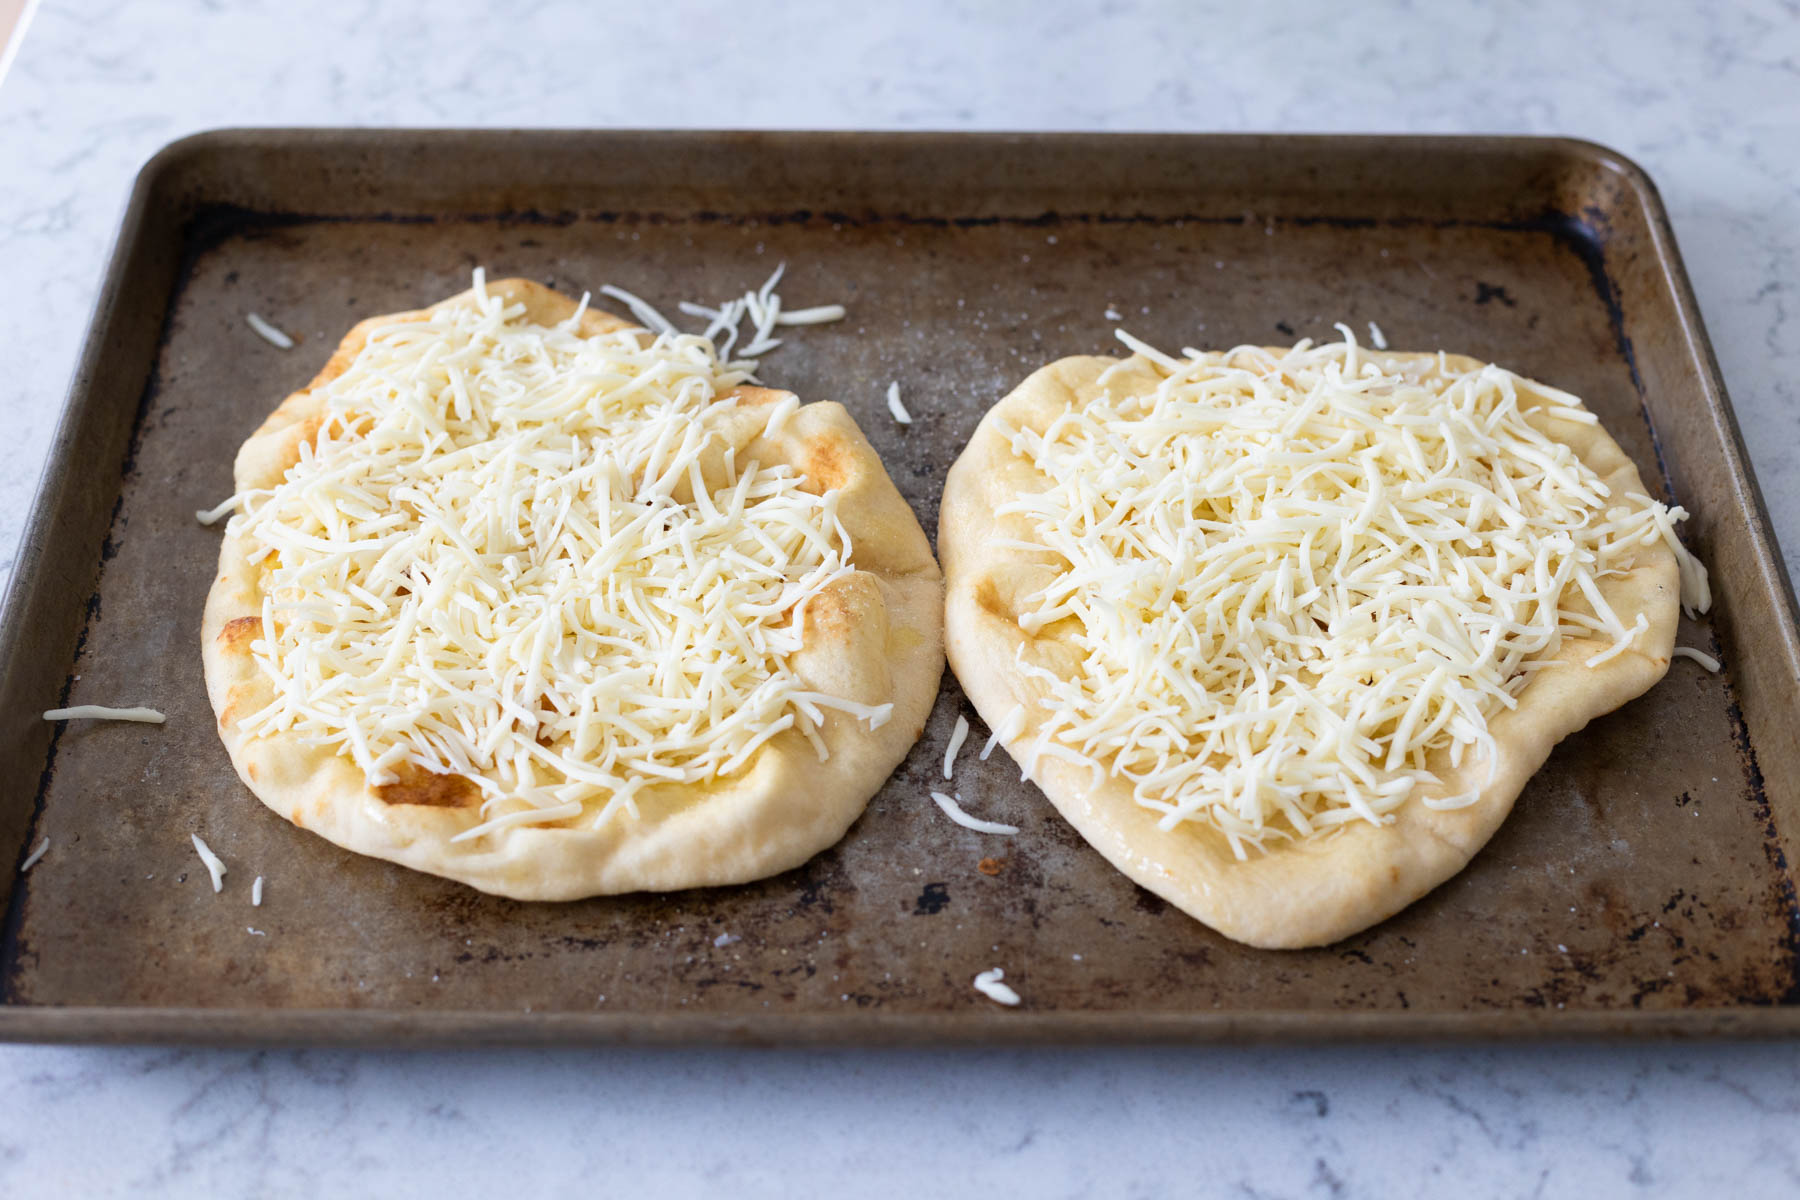 The shredded mozzarella has been sprinkled over the naan breads.